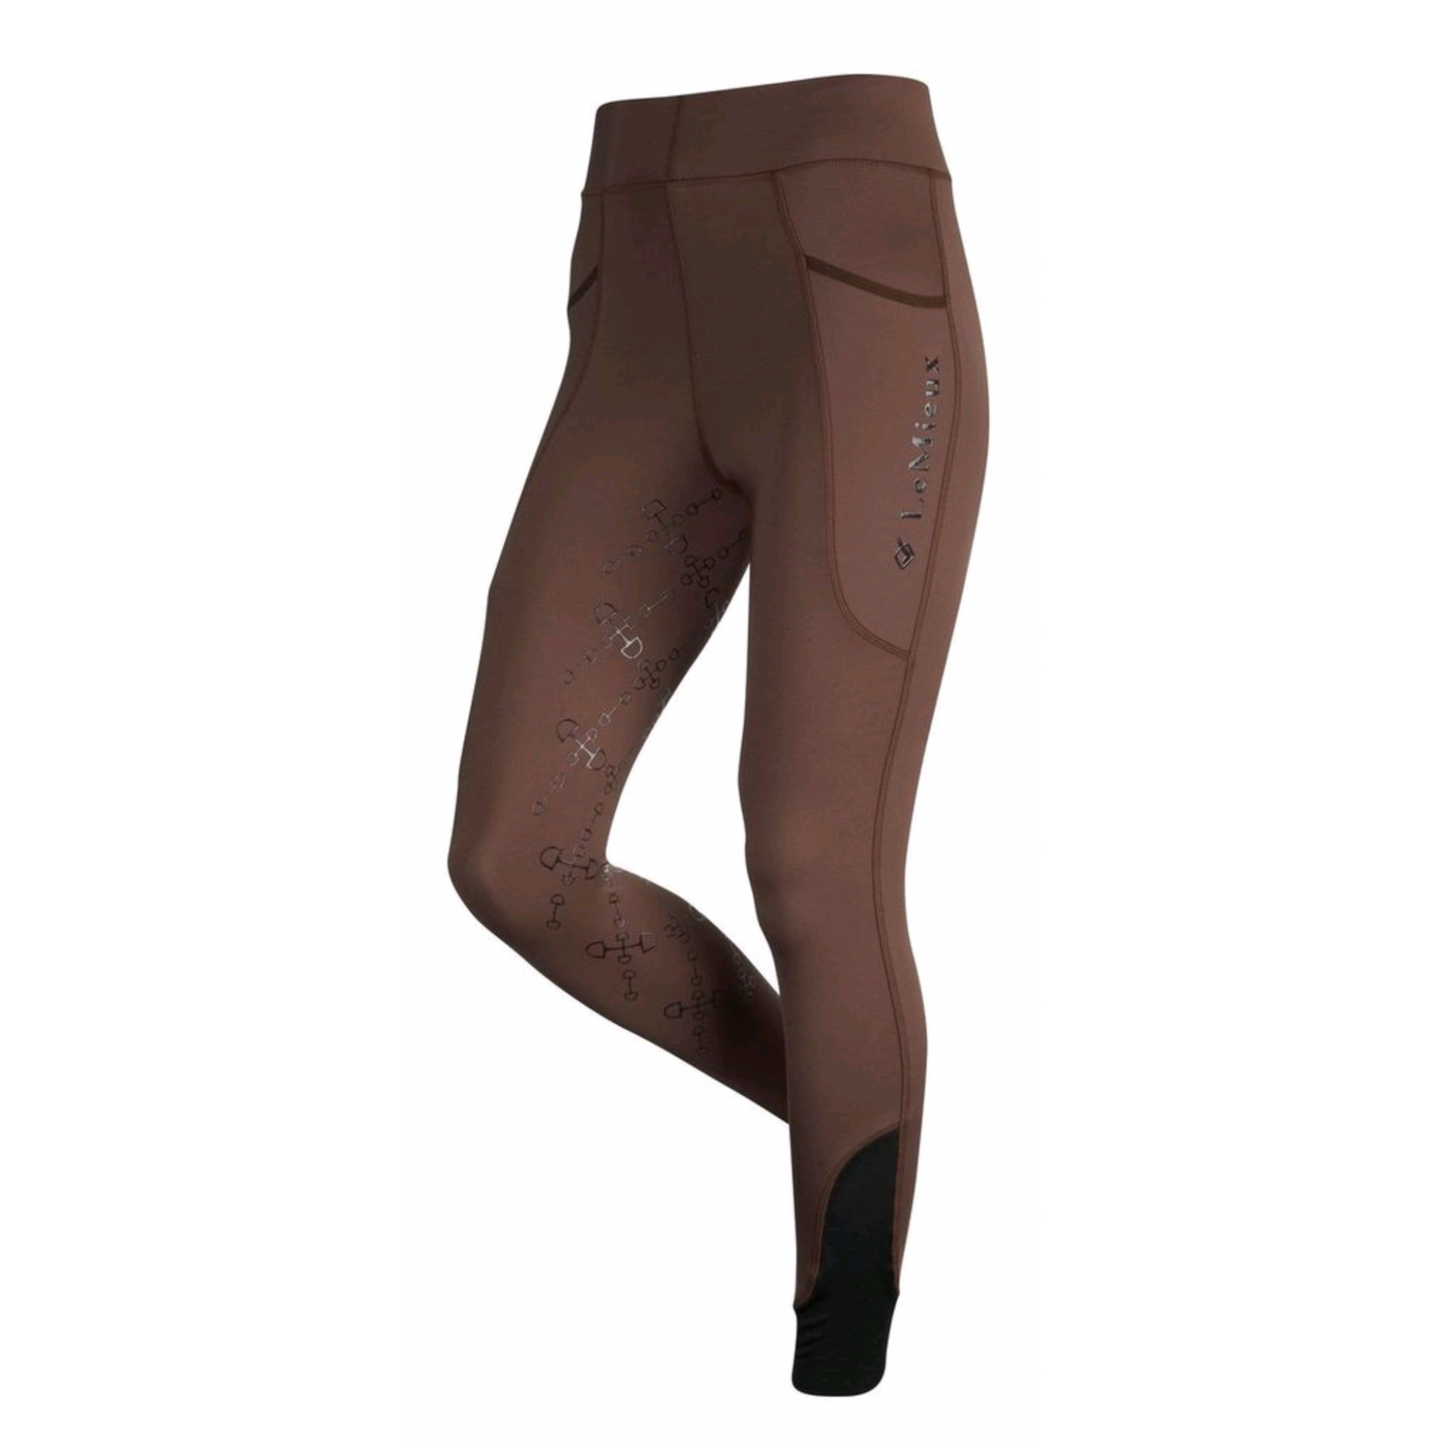 Brown horse riding tights with logo, isolated on white background.